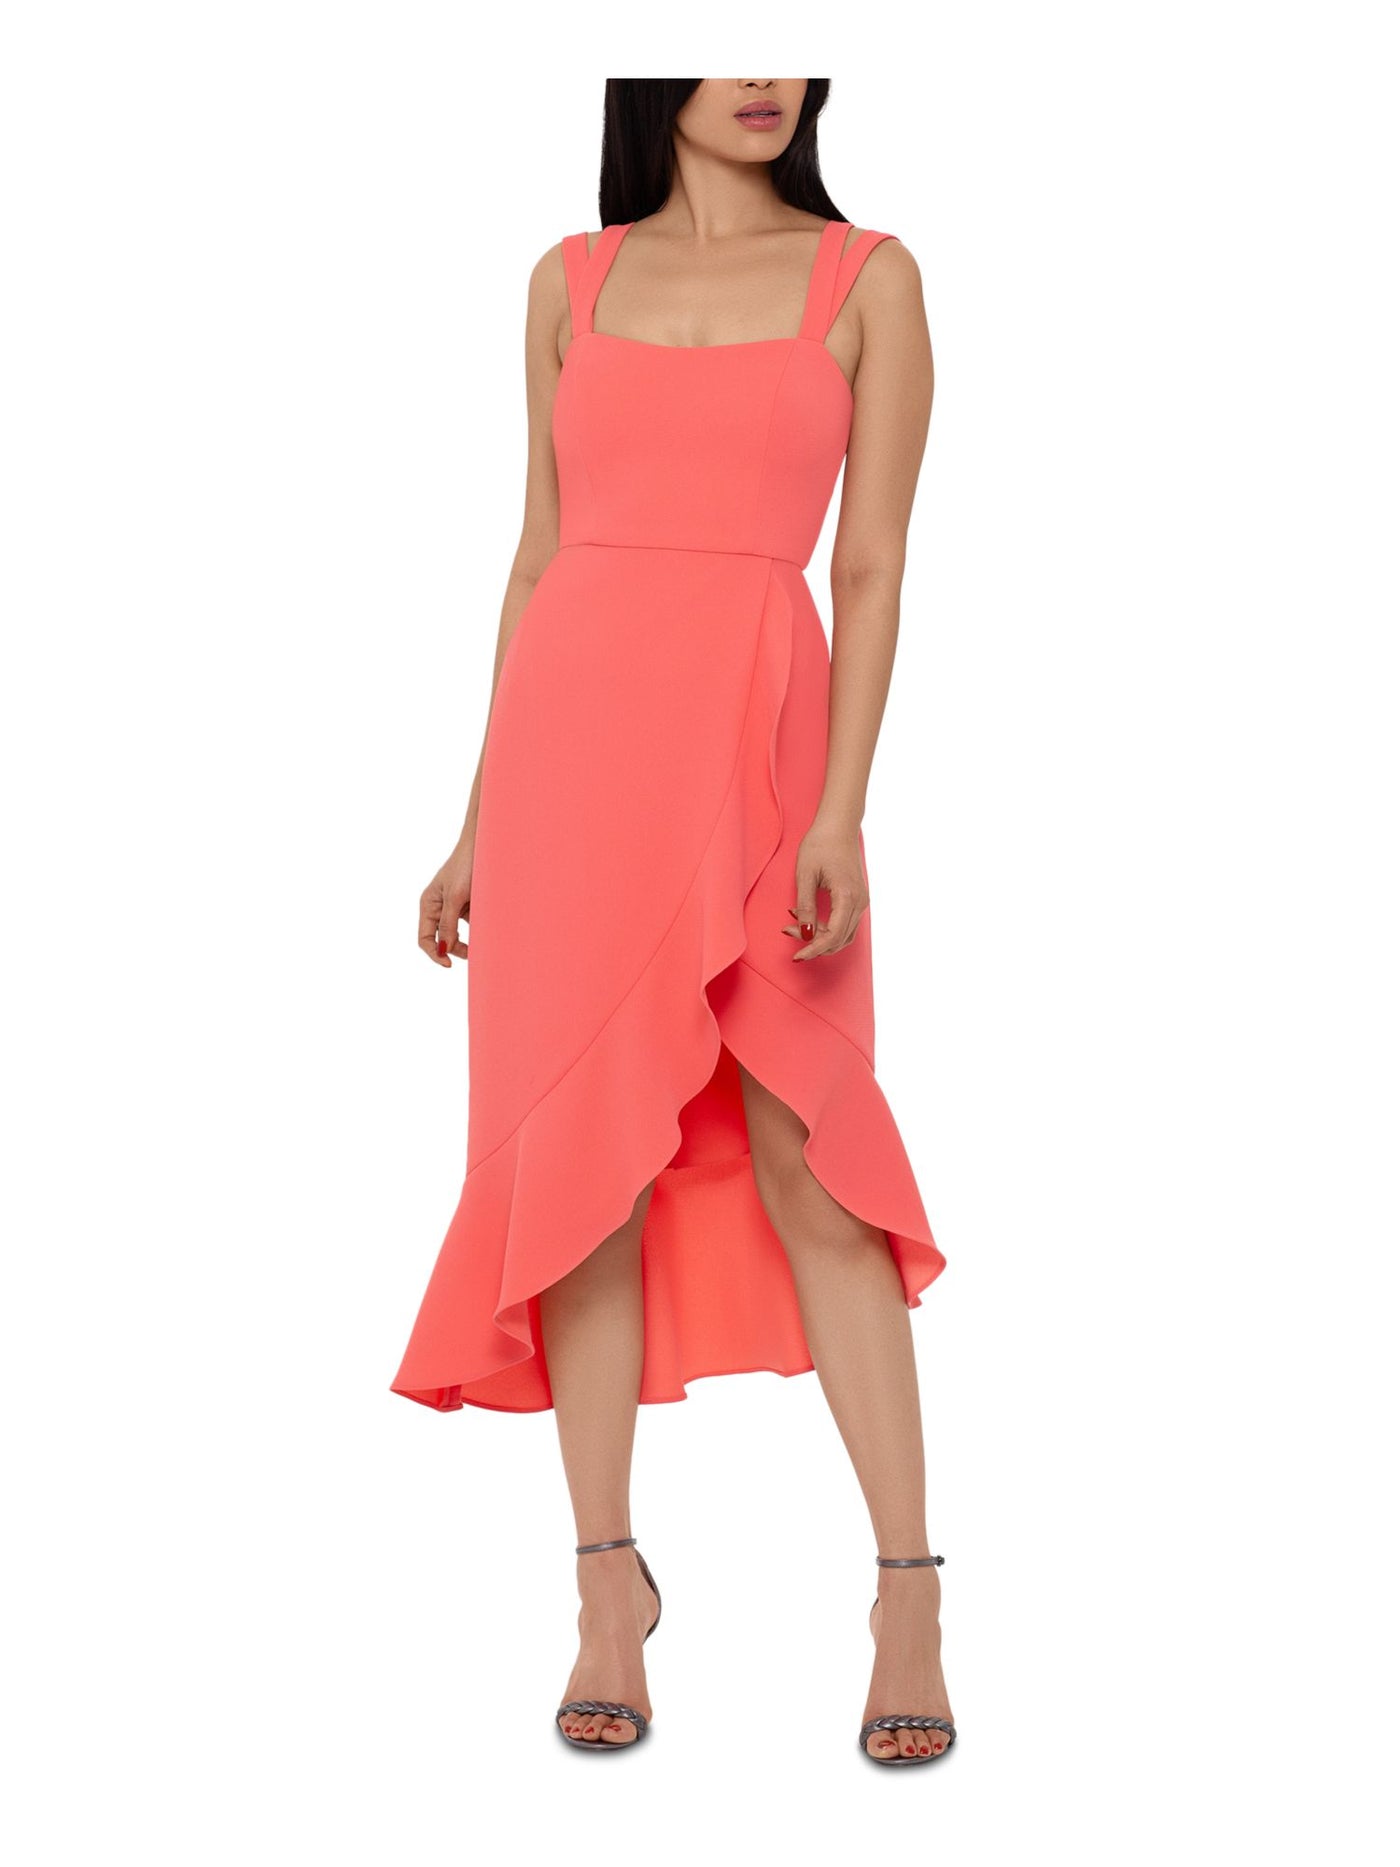 XSCAPE Womens Coral Stretch Ruffled Sleeveless Square Neck Short Party Hi-Lo Dress 6